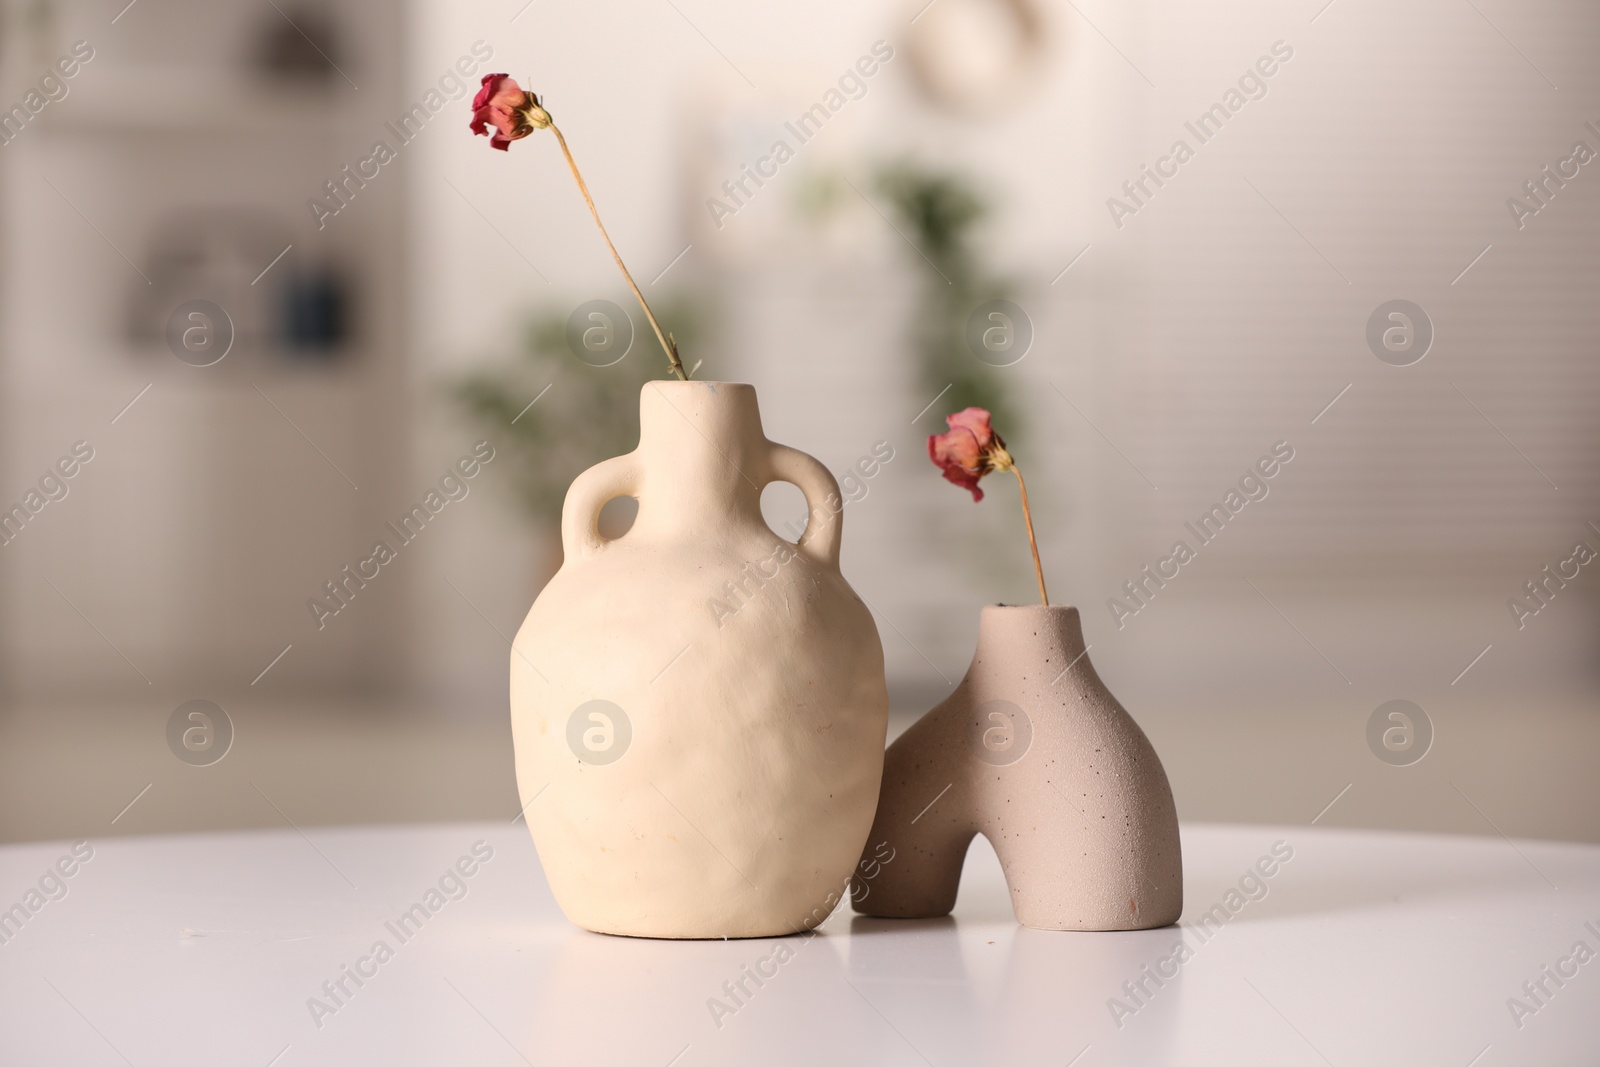 Photo of Vases with dried flowers on white table in room